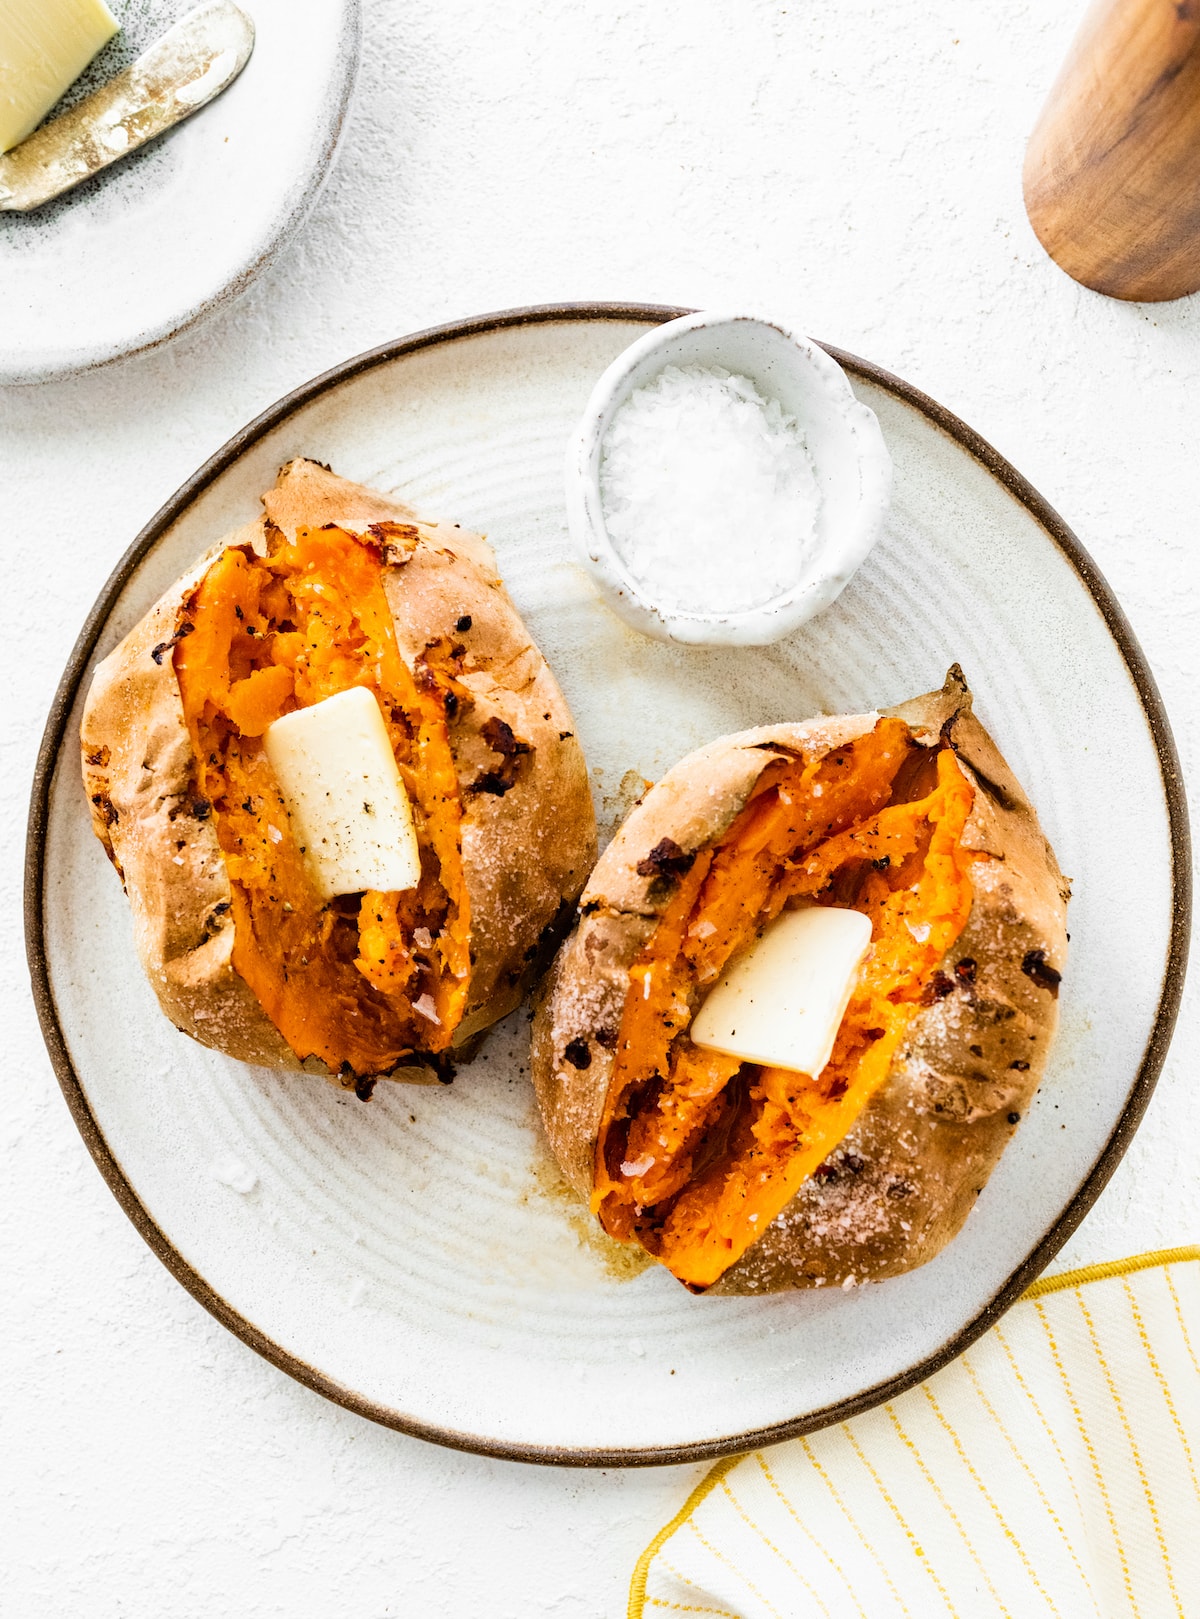 Two whole air-fried sweet potatoes on a plate. The sweet potatoes are split open with a slice of butter inside.